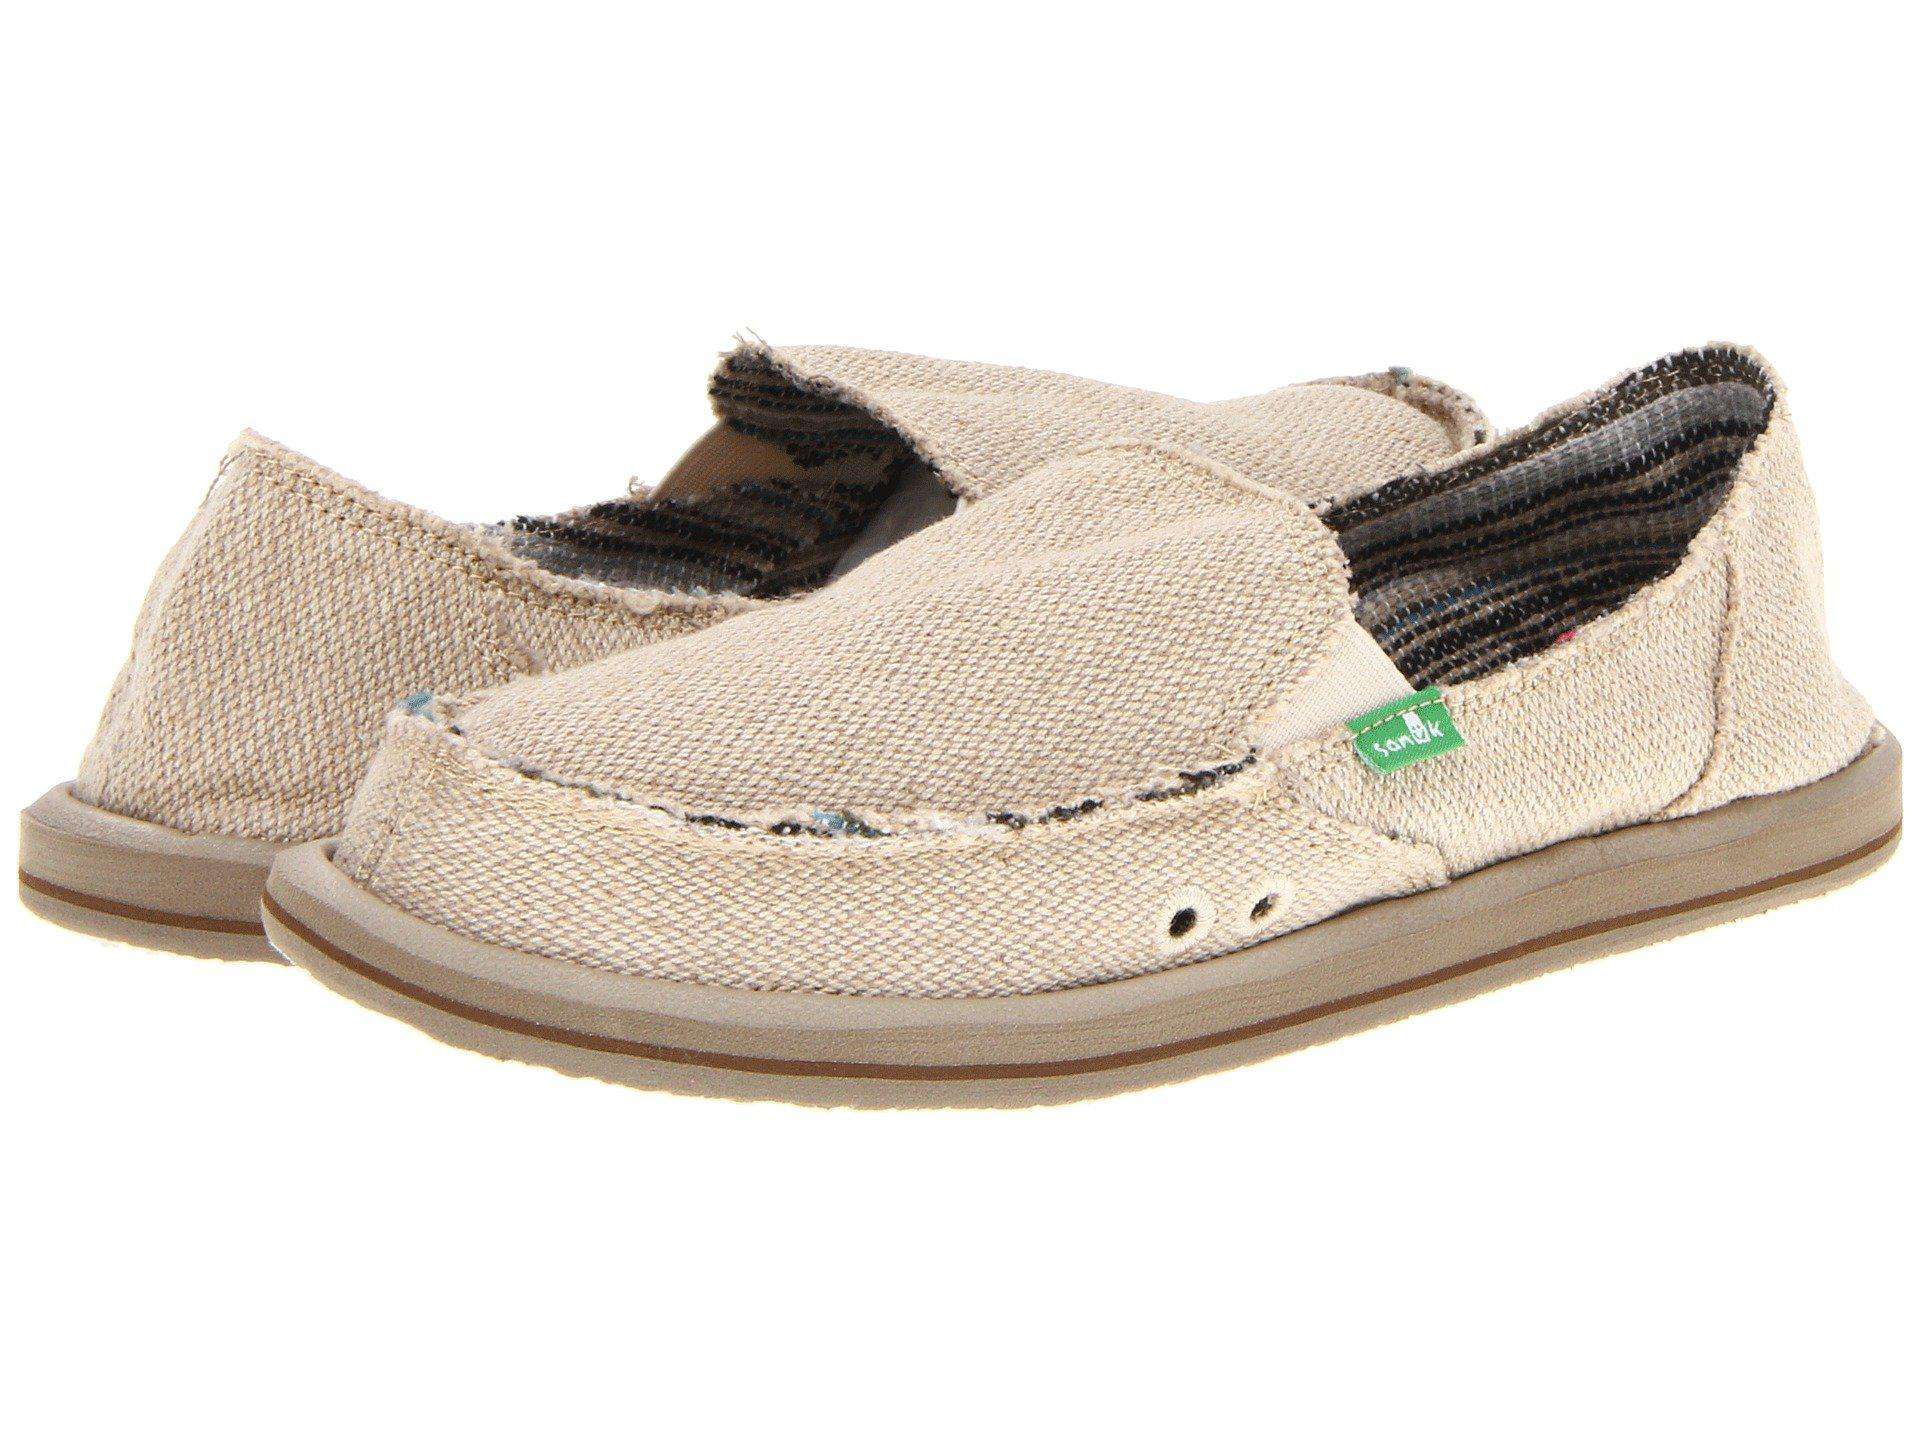 Where To Buy Sanuk Shoes In Stores - LoveShoesClub.com